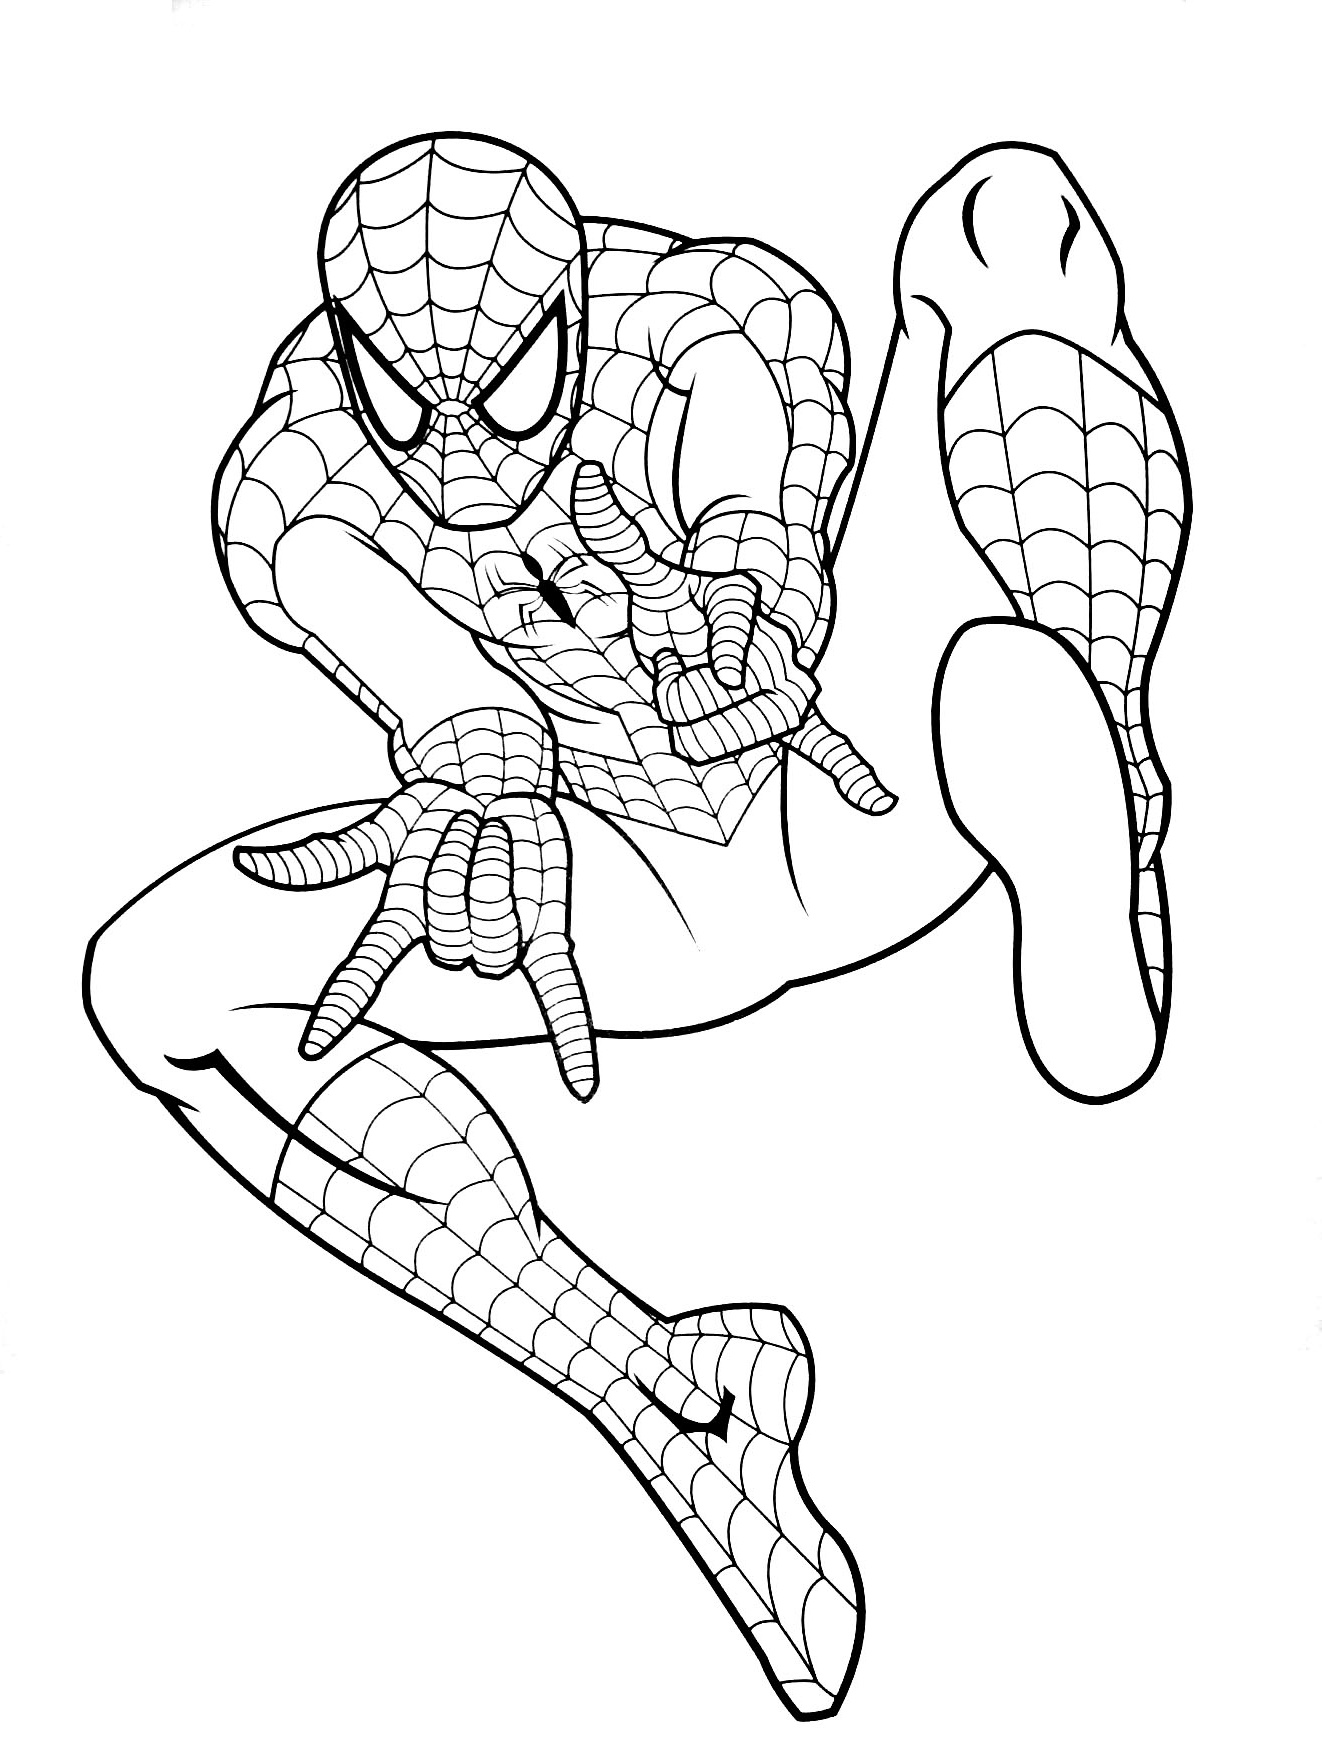 Coloriage Spider Man Beau Photos Spiderman to Color for Kids Spiderman Kids Coloring Pages